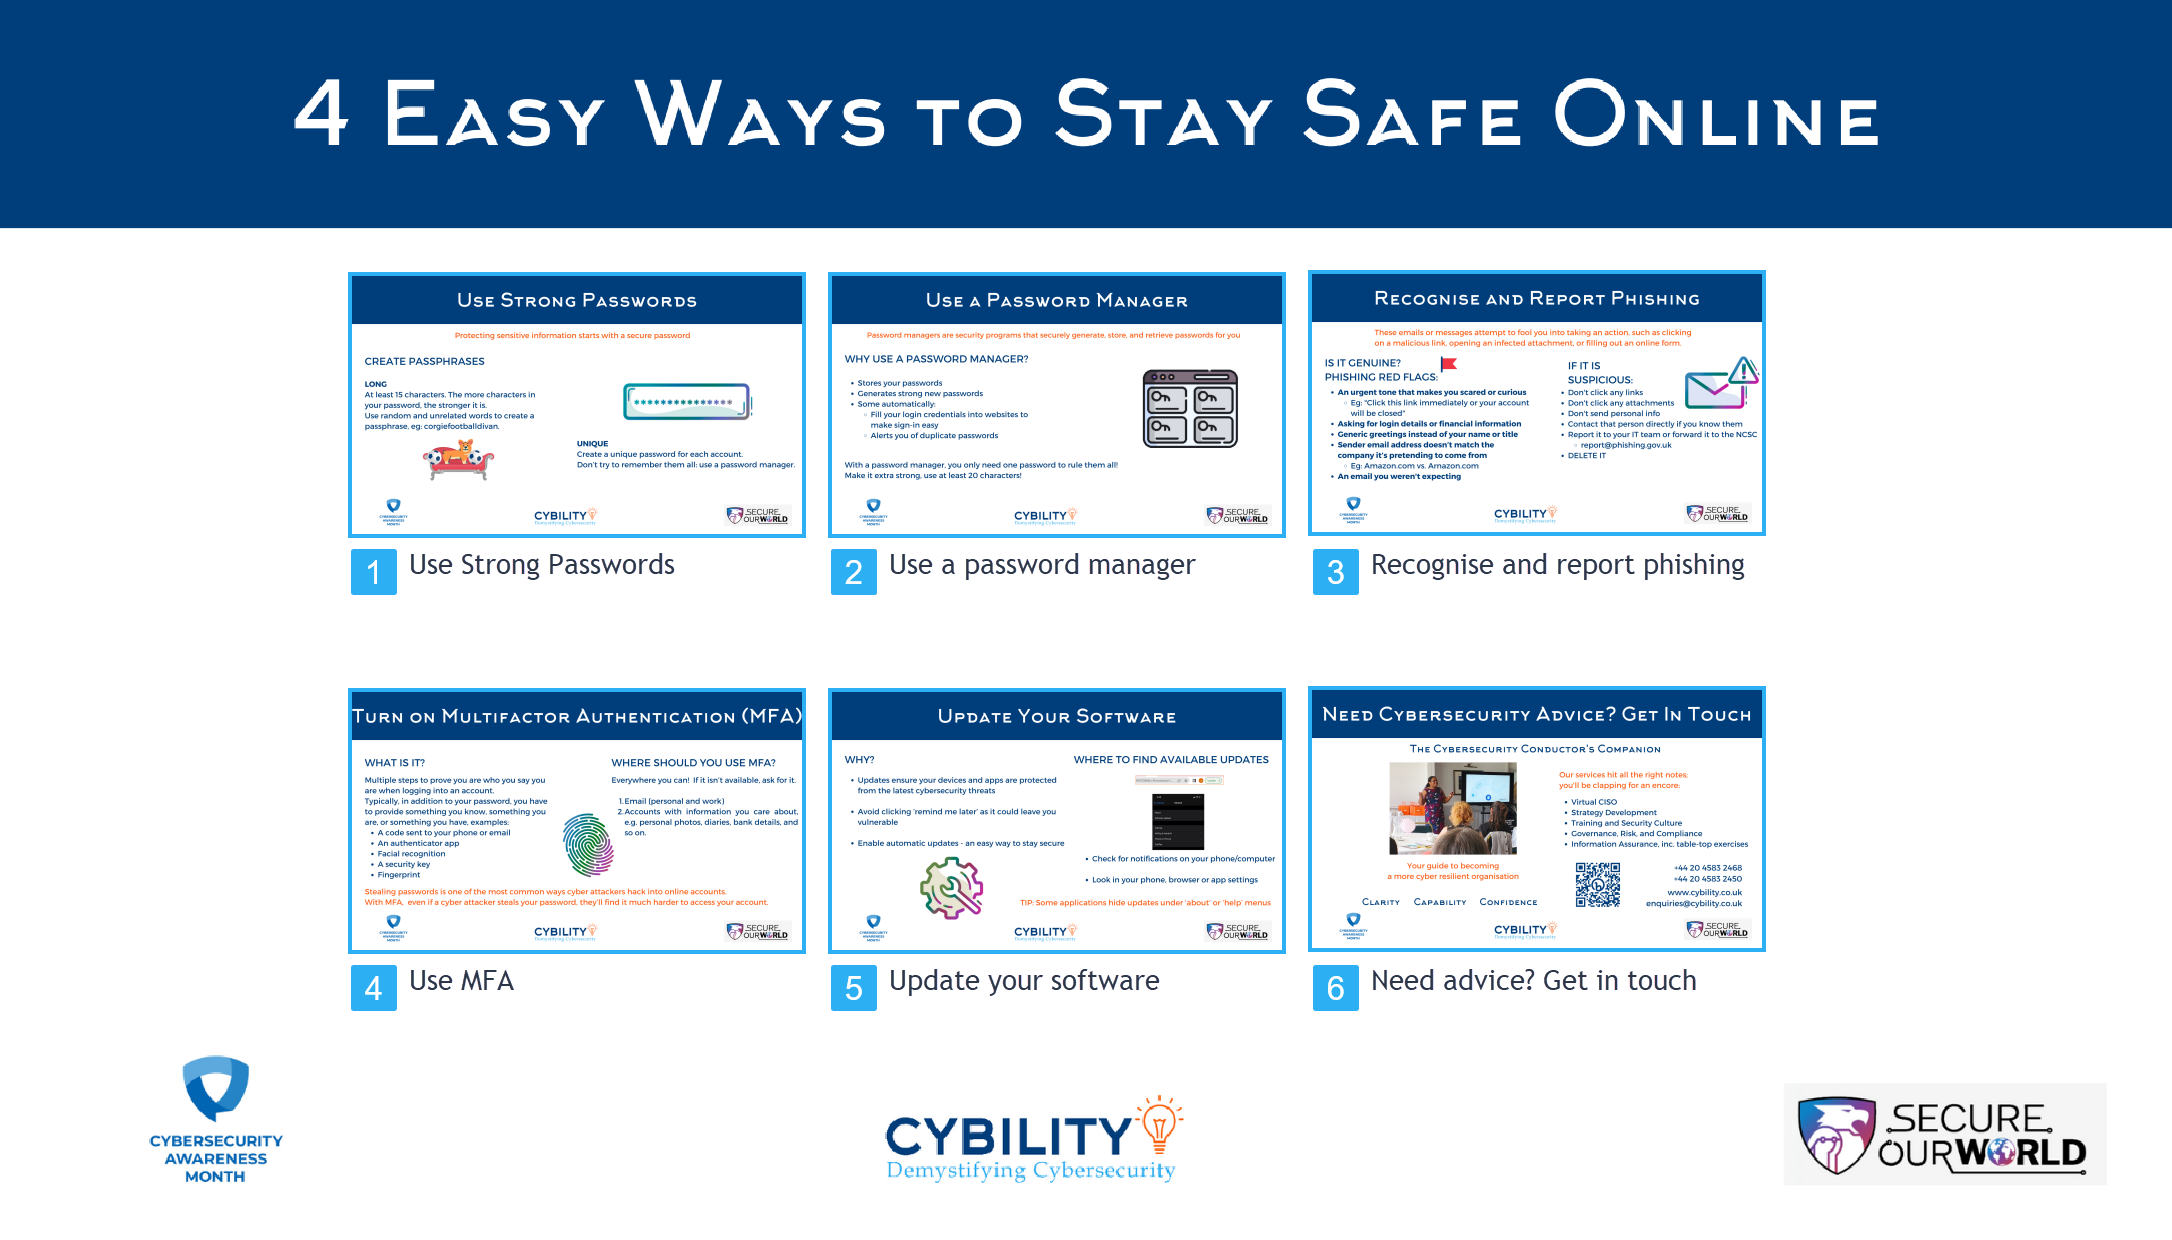 Thumbnail of the 4 keys to cybersecurity guide